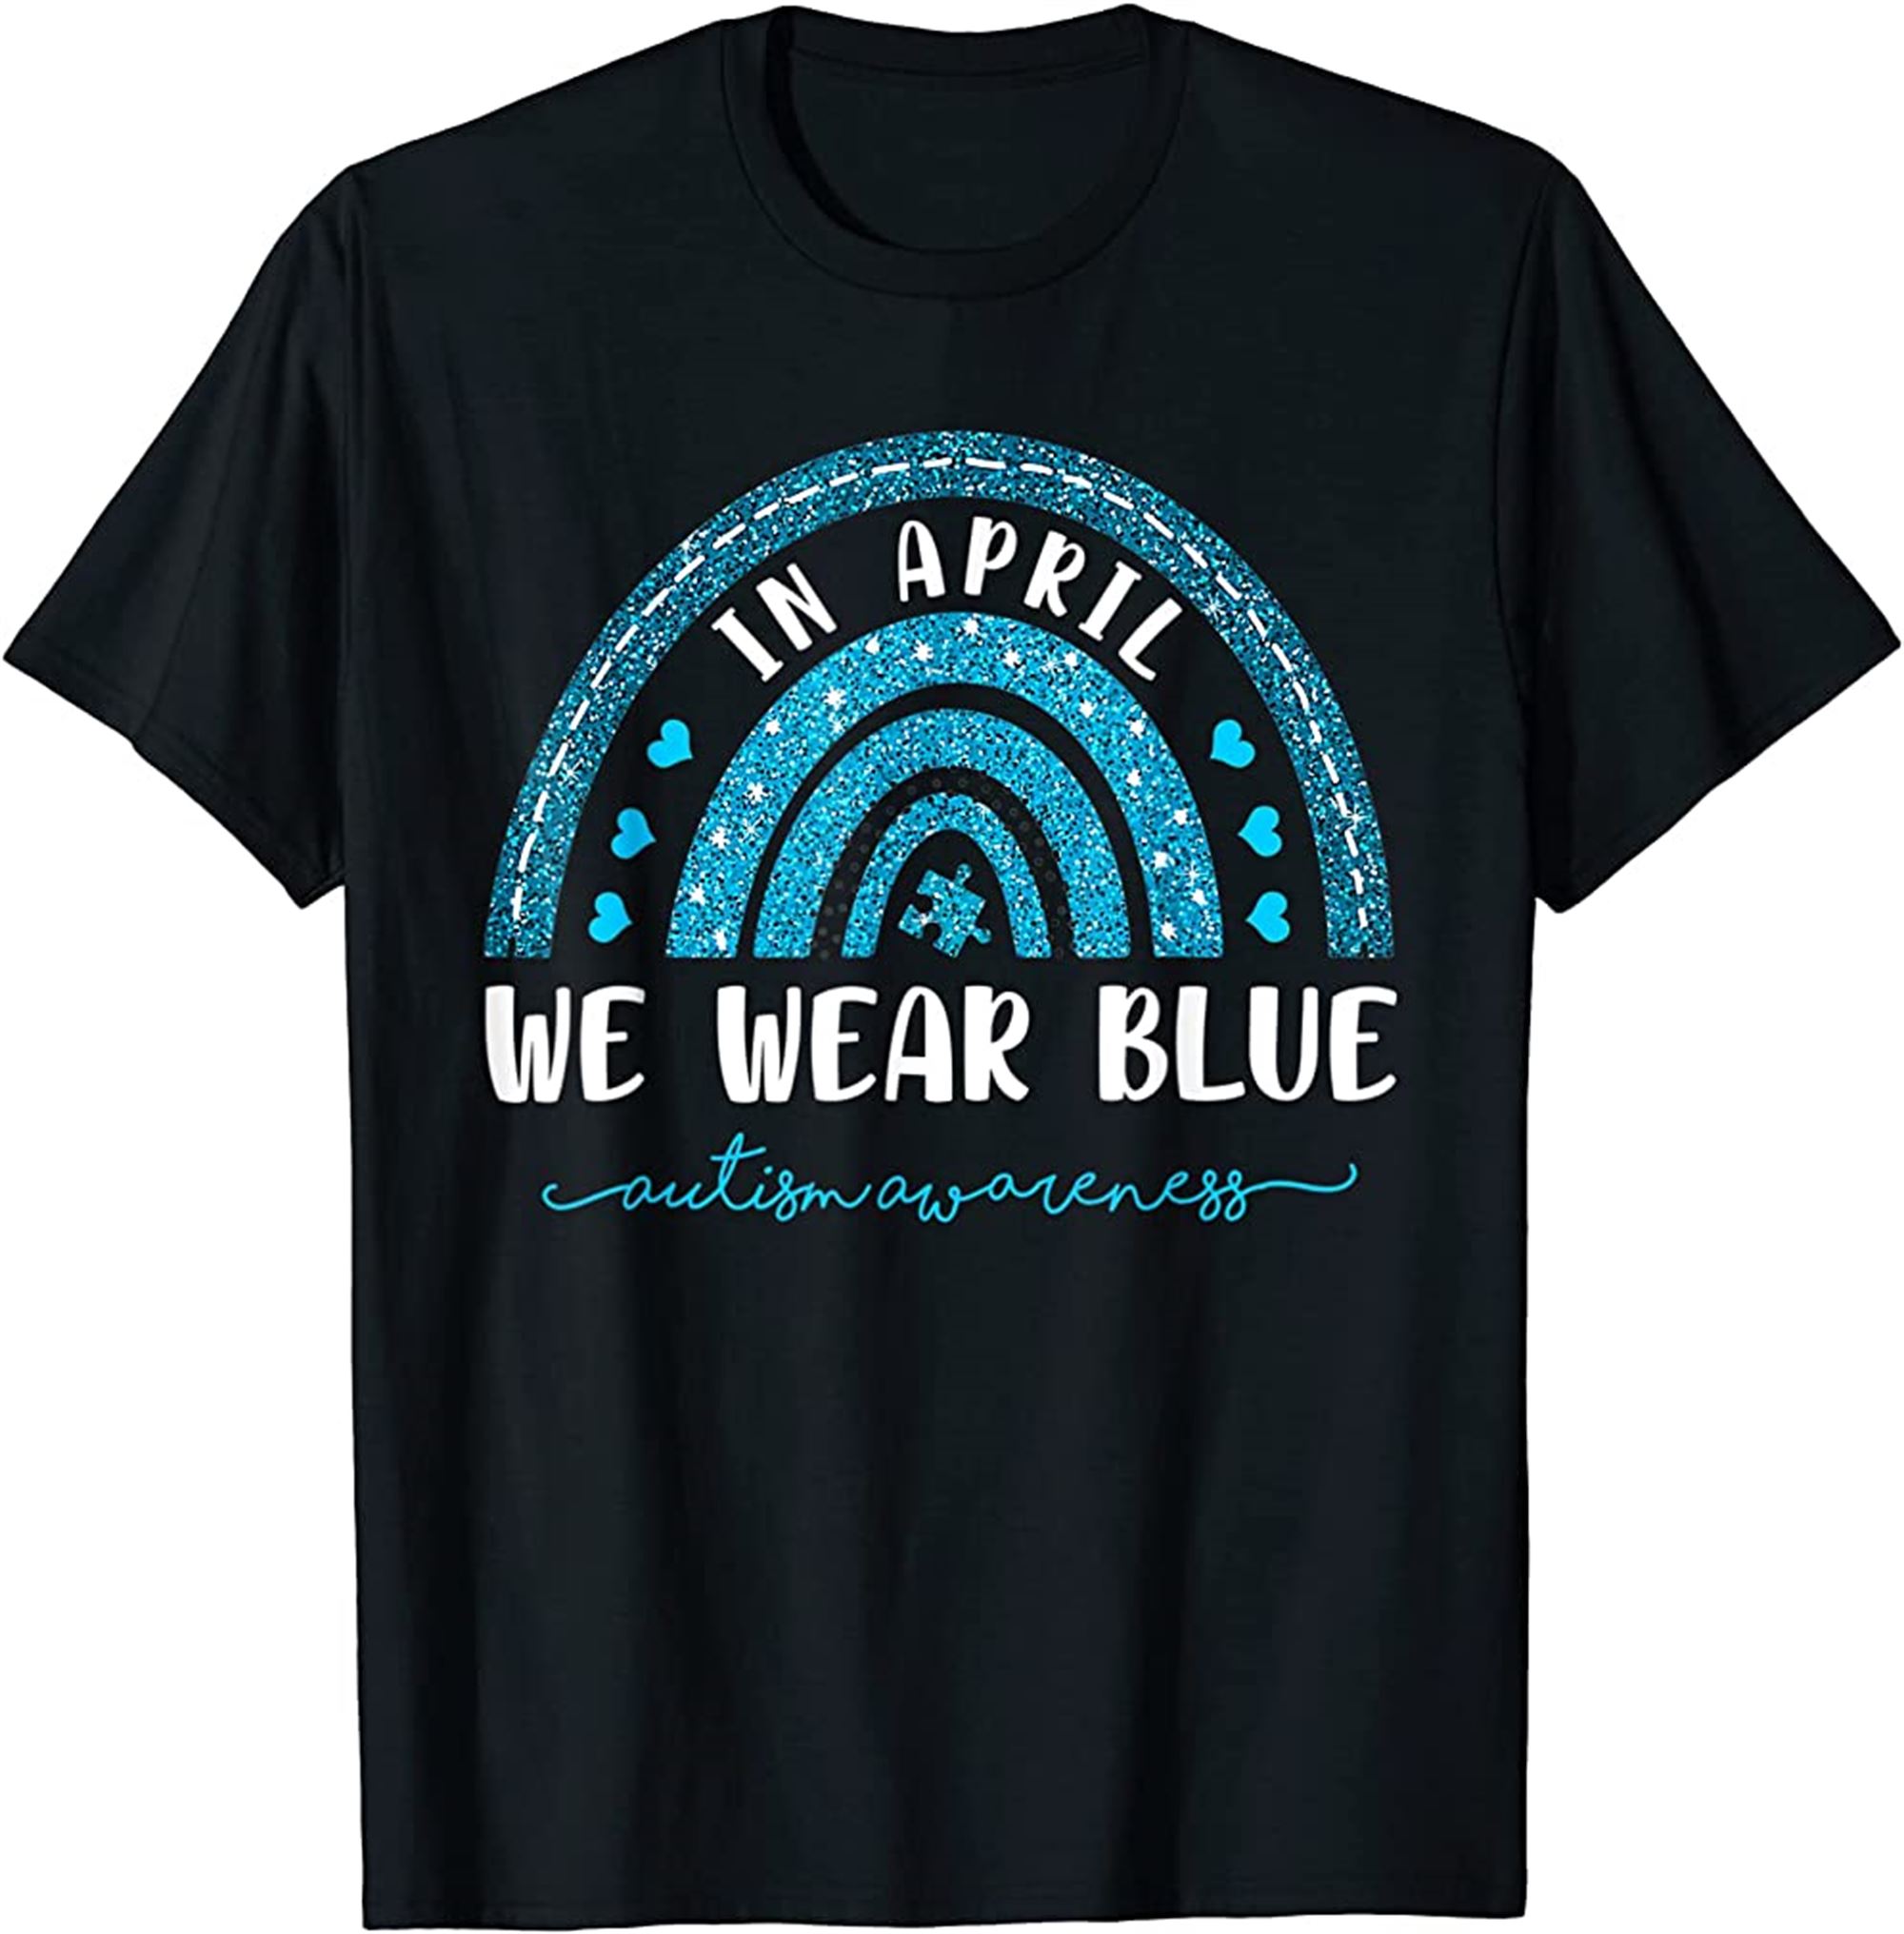 Rainbow In April We Wear Blue Autism Awareness T-shirt Plus Size Up To 5xl